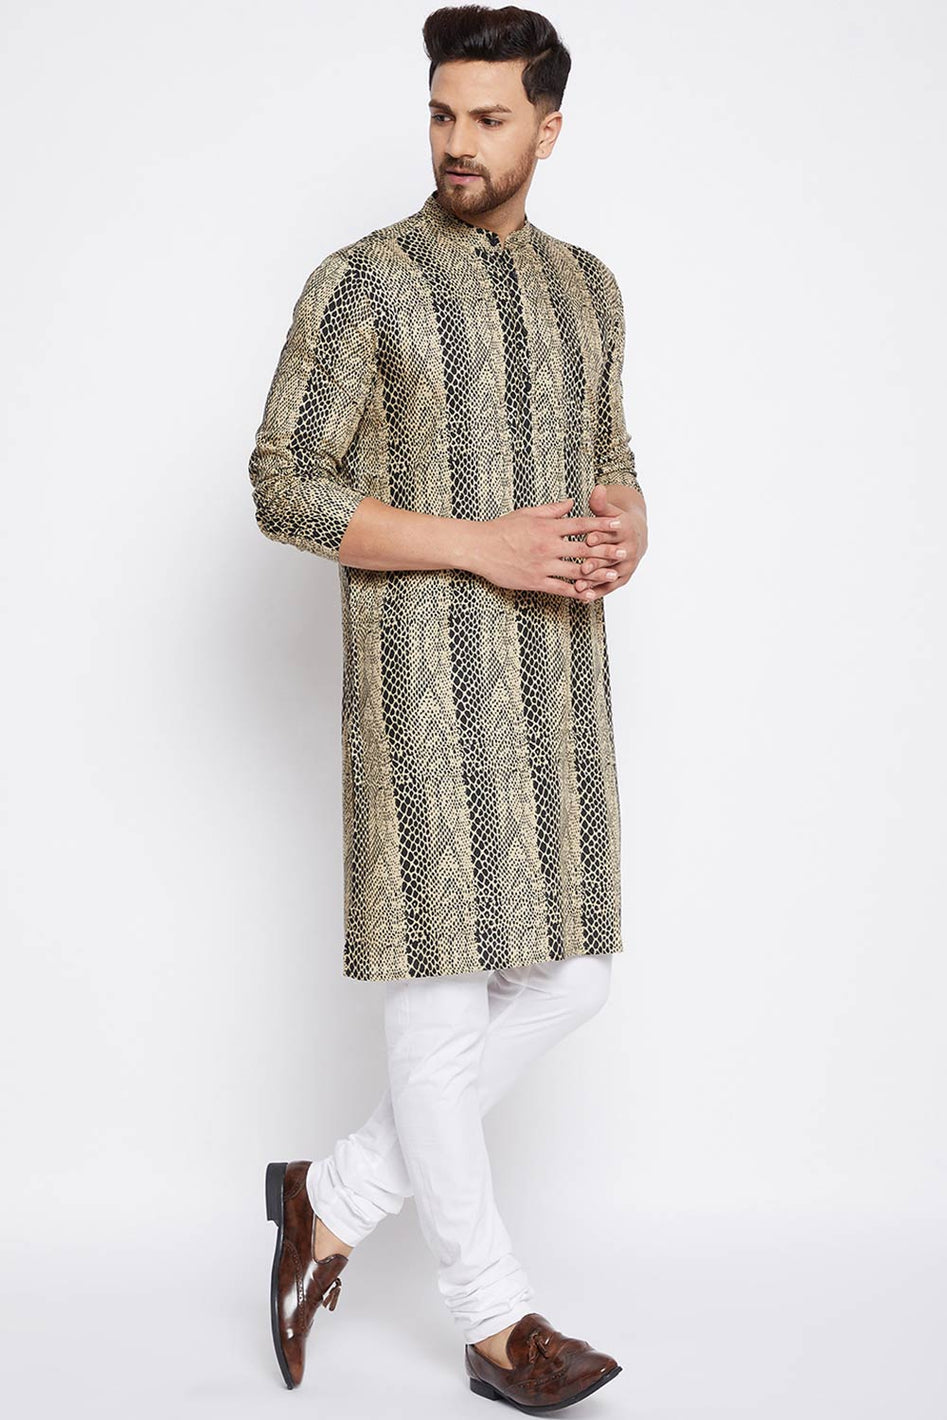 Animal Print Kurta Indian Clothing in Denver, CO, Aurora, CO, Boulder, CO, Fort Collins, CO, Colorado Springs, CO, Parker, CO, Highlands Ranch, CO, Cherry Creek, CO, Centennial, CO, and Longmont, CO. NATIONWIDE SHIPPING USA- India Fashion X